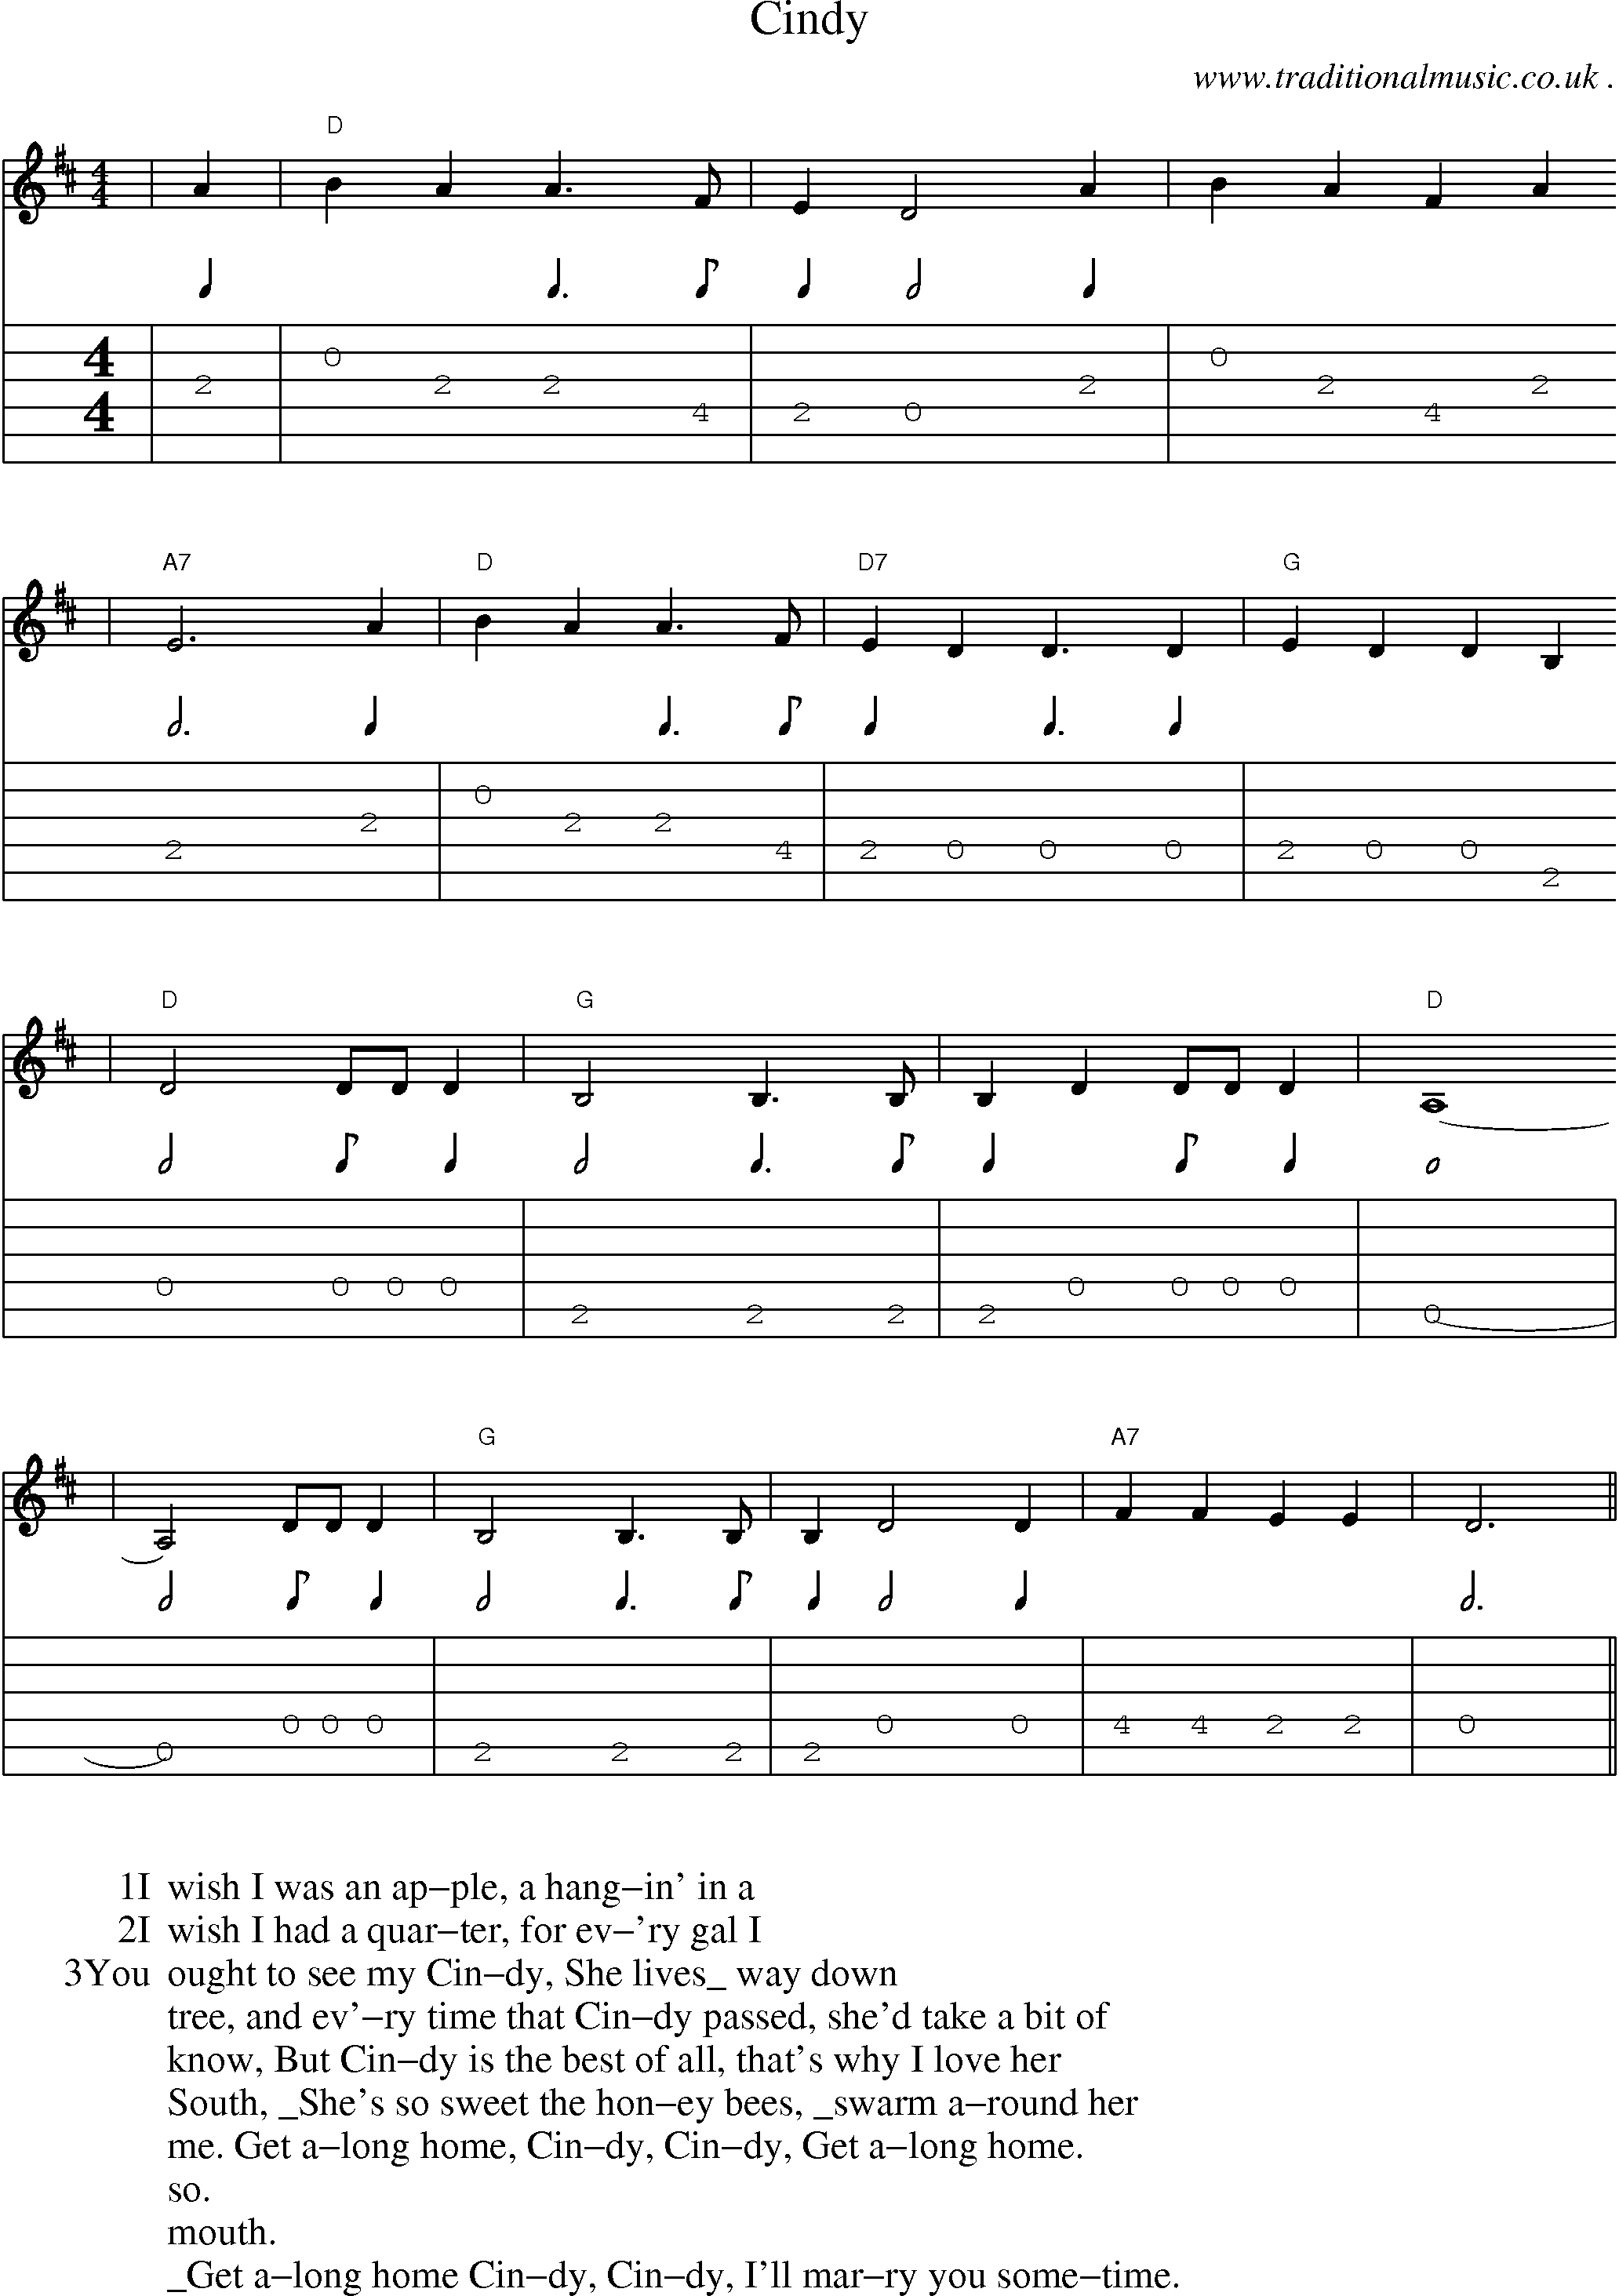 Music Score and Guitar Tabs for Cindy